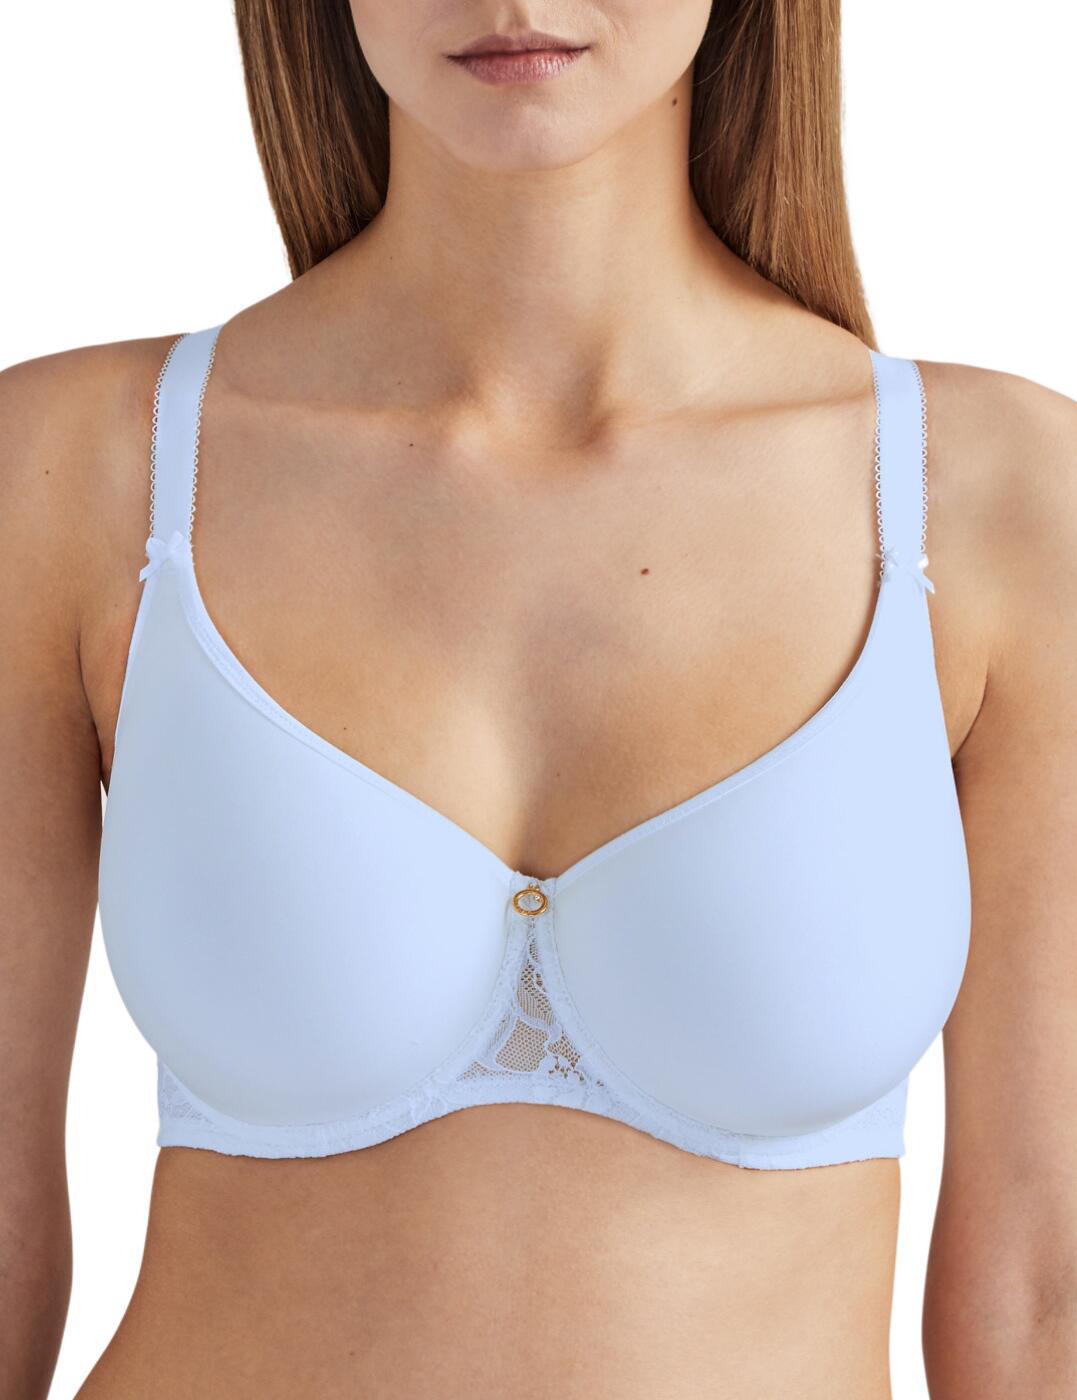 Aubade Rosessence Spacer T-Shirt Bra HK09-02 Underwired Moulded Womens Bras